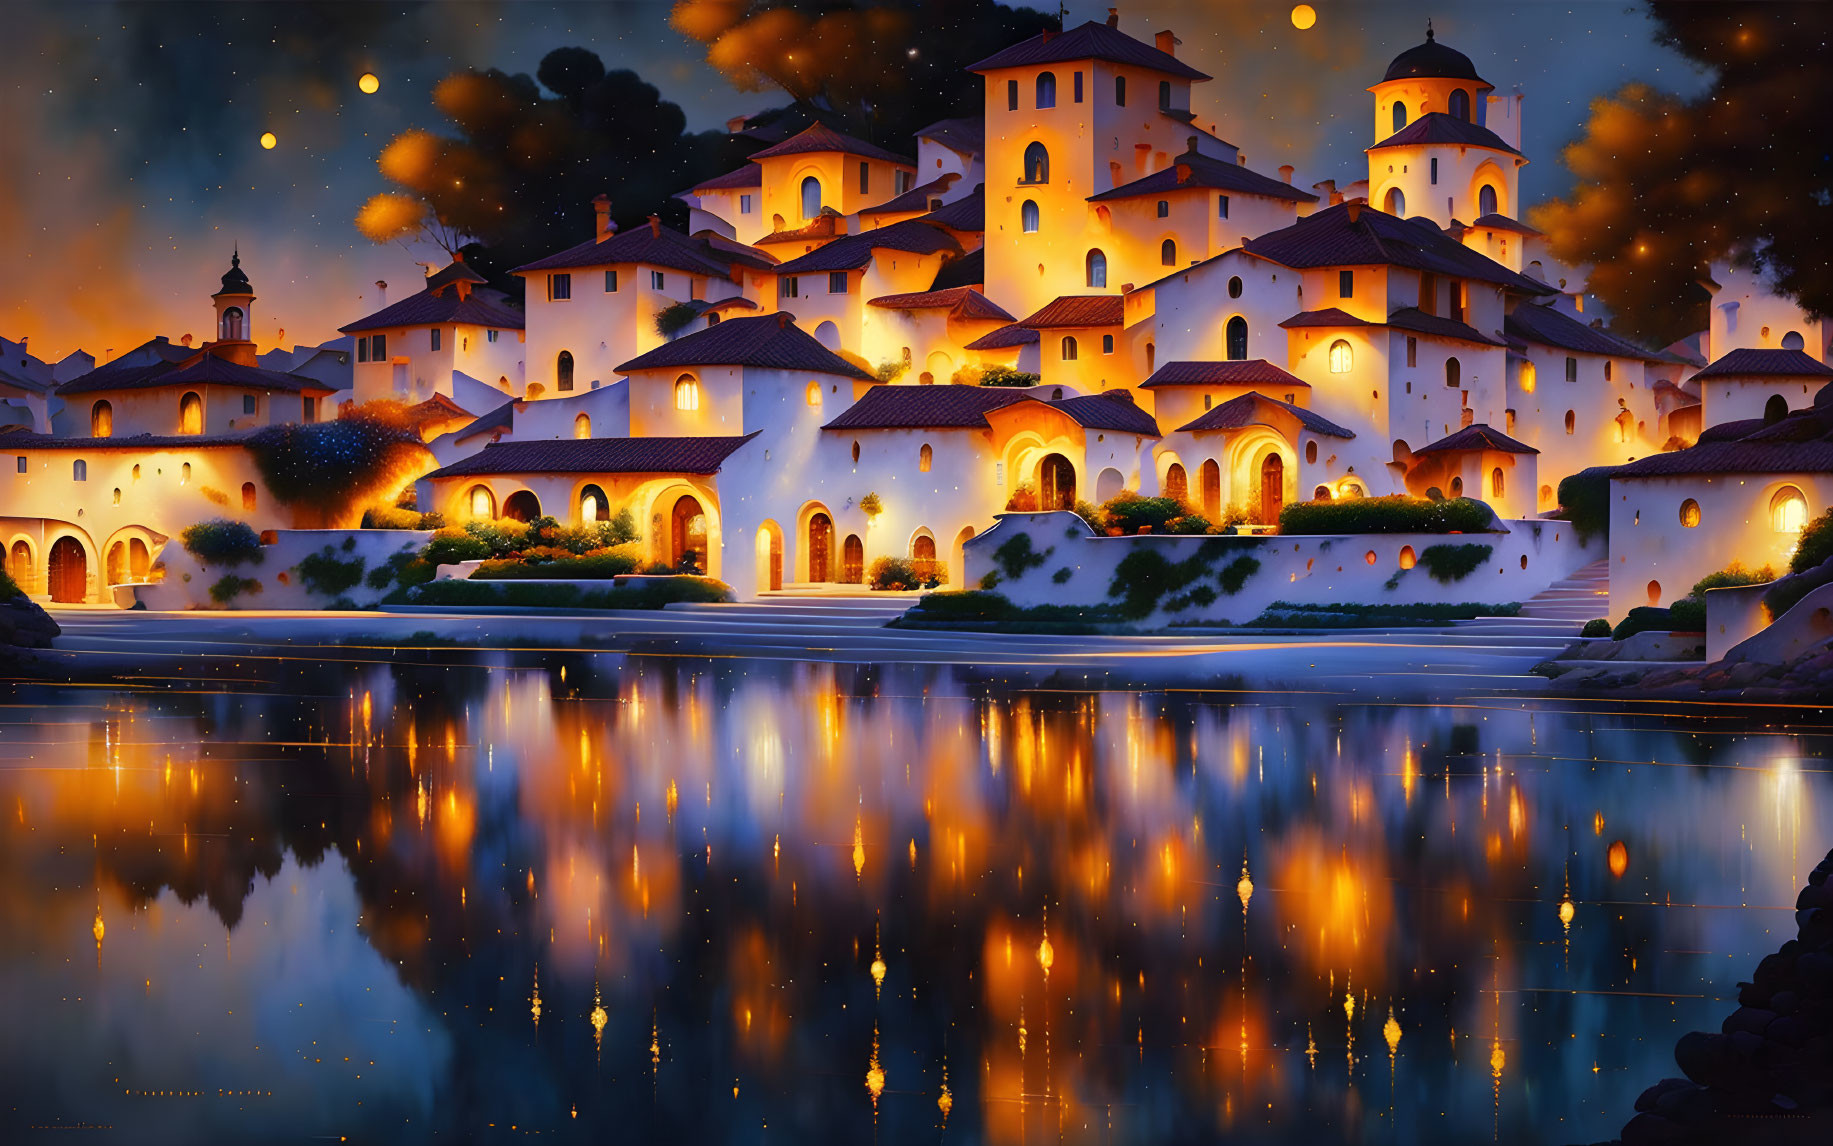 Starlit Village Reflecting in Tranquil Water Under Dusky Sky